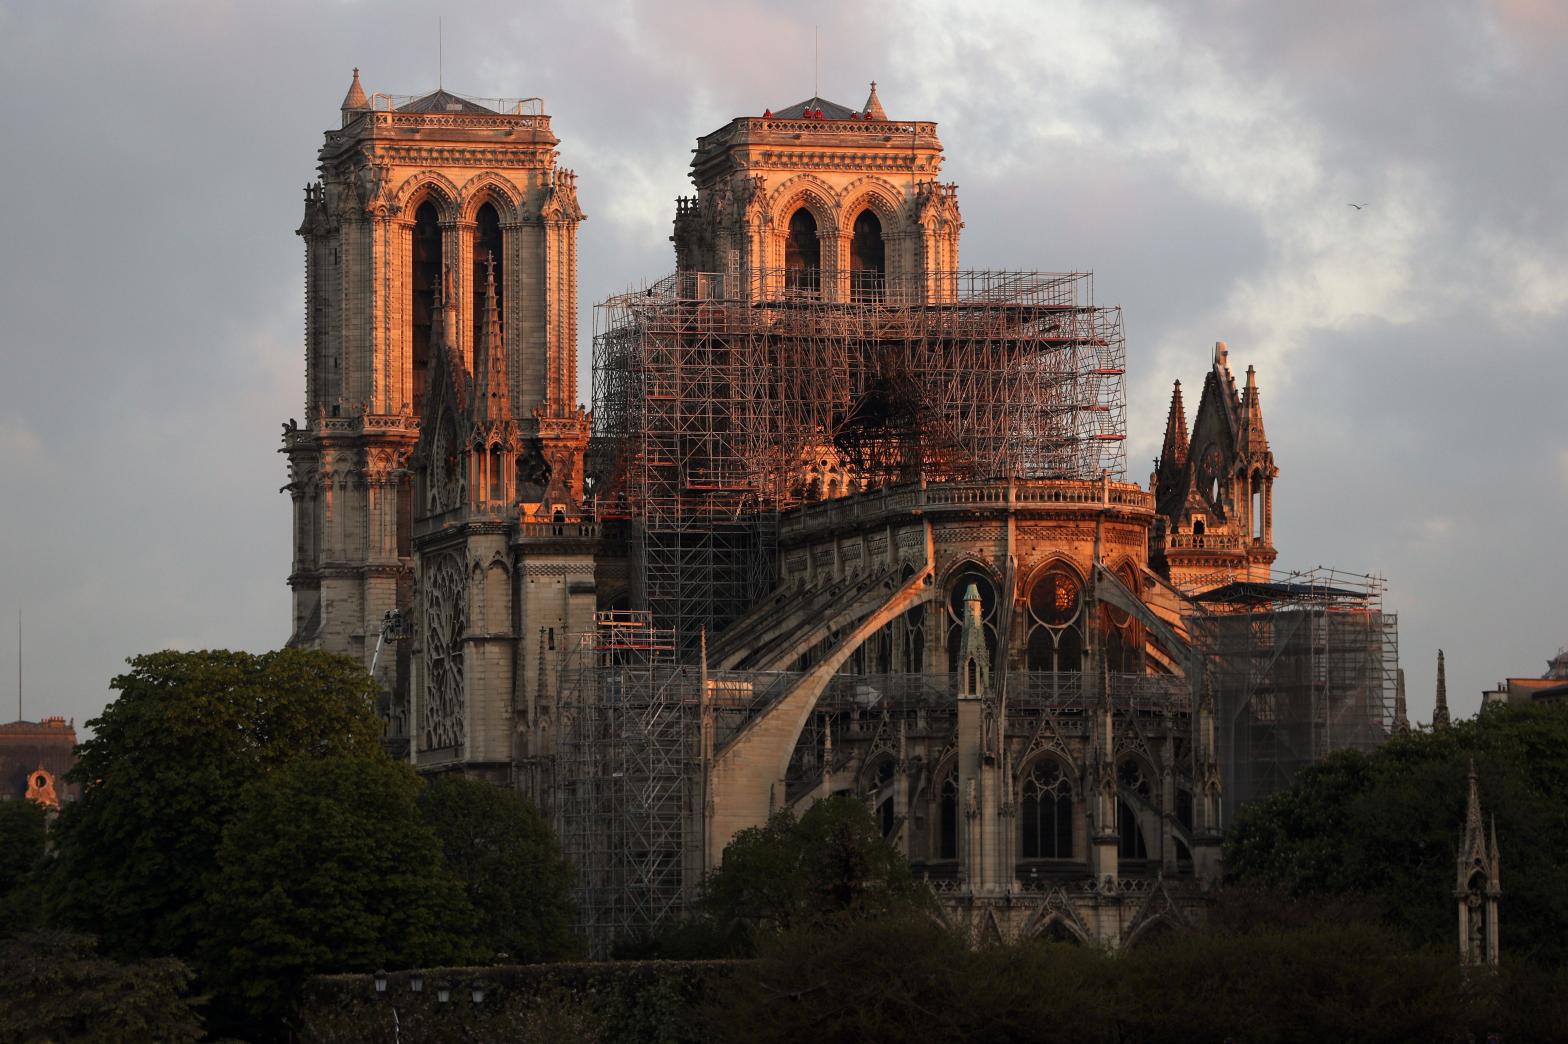 Notre-Dame Cathedral, seen two days after a devastating fire. (Photo: Dan Kitwood, Getty Images)